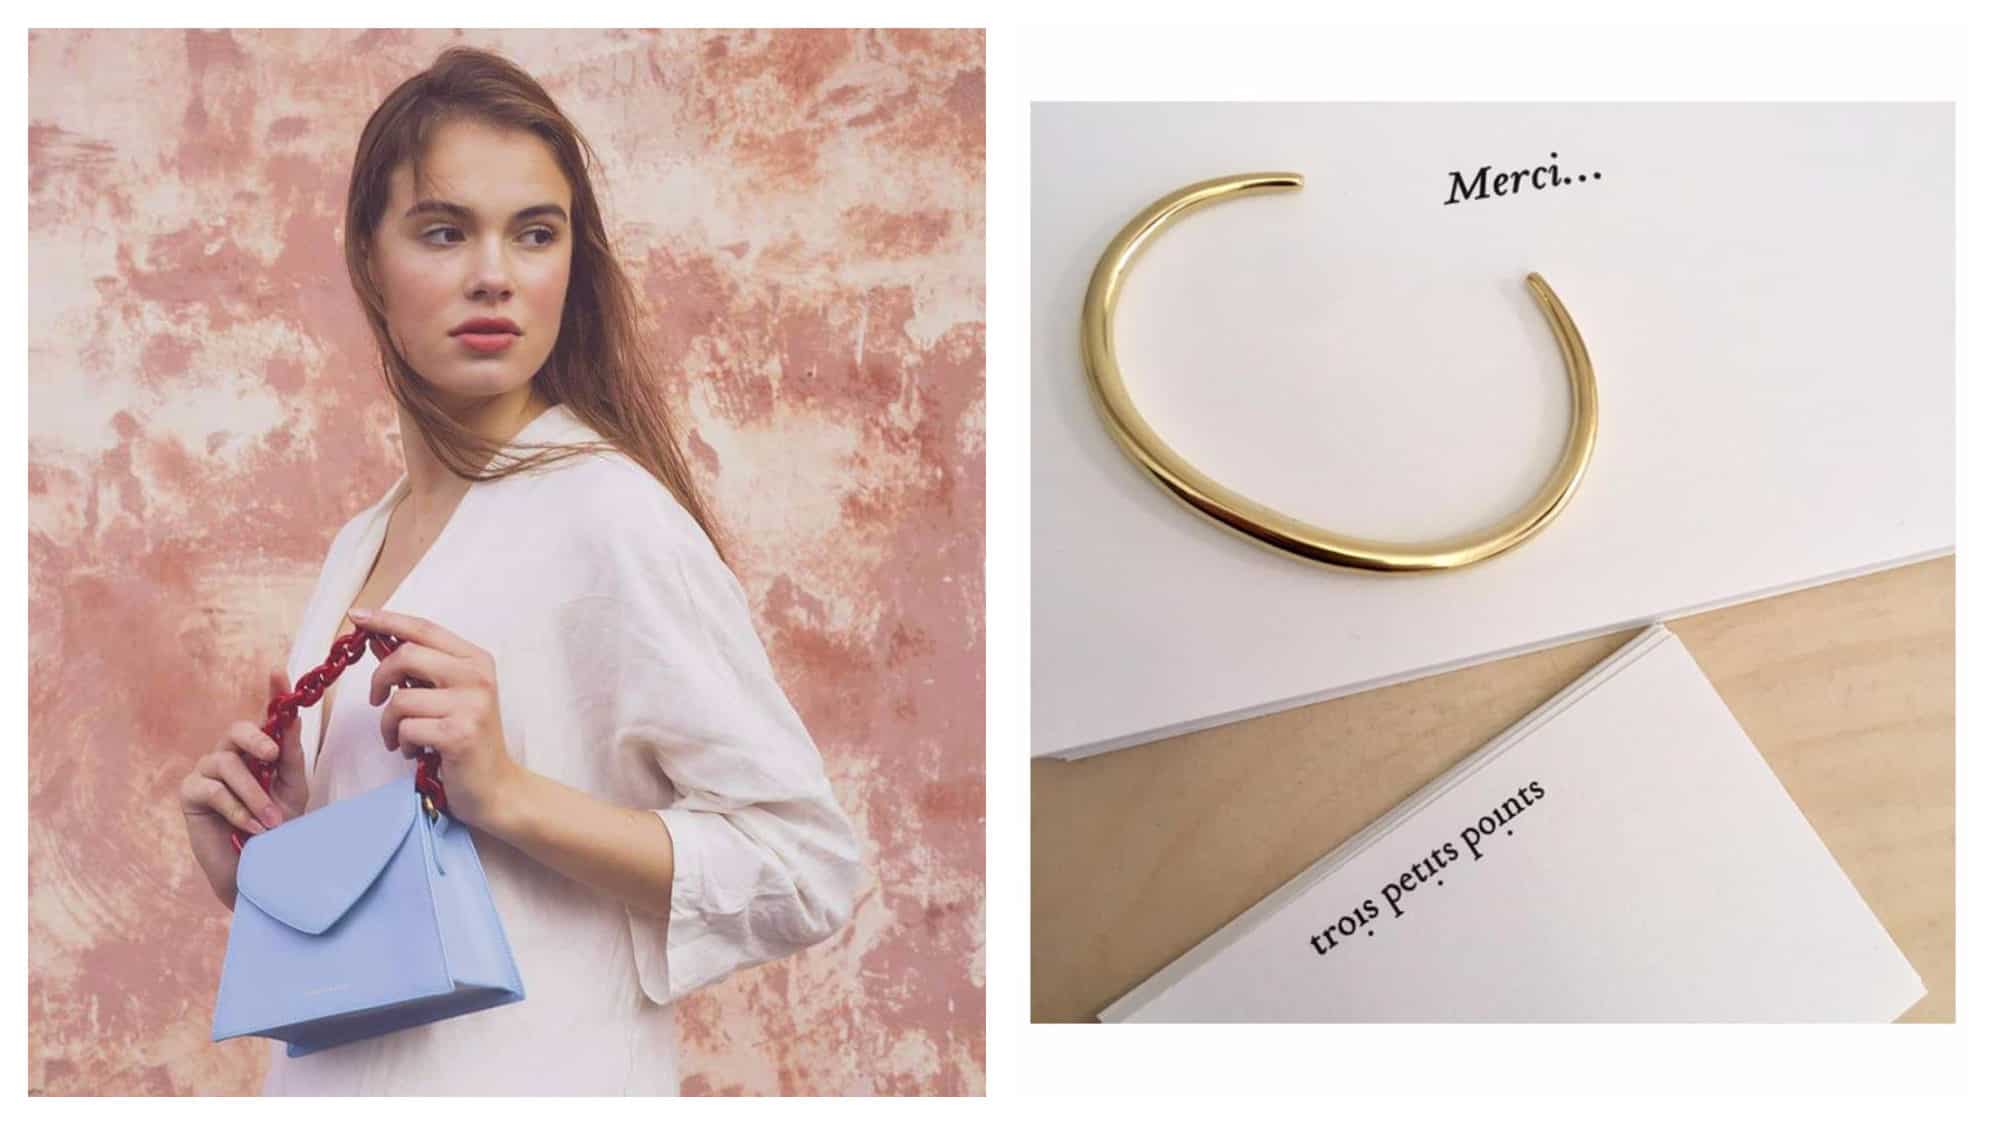 A Tammy and Benjamin powder-blue bag with red chain being held by a model against a terracotta background (left). A gold bracelet on a piece of white paper that reads 'Merci' by Trois Petits Points (right).